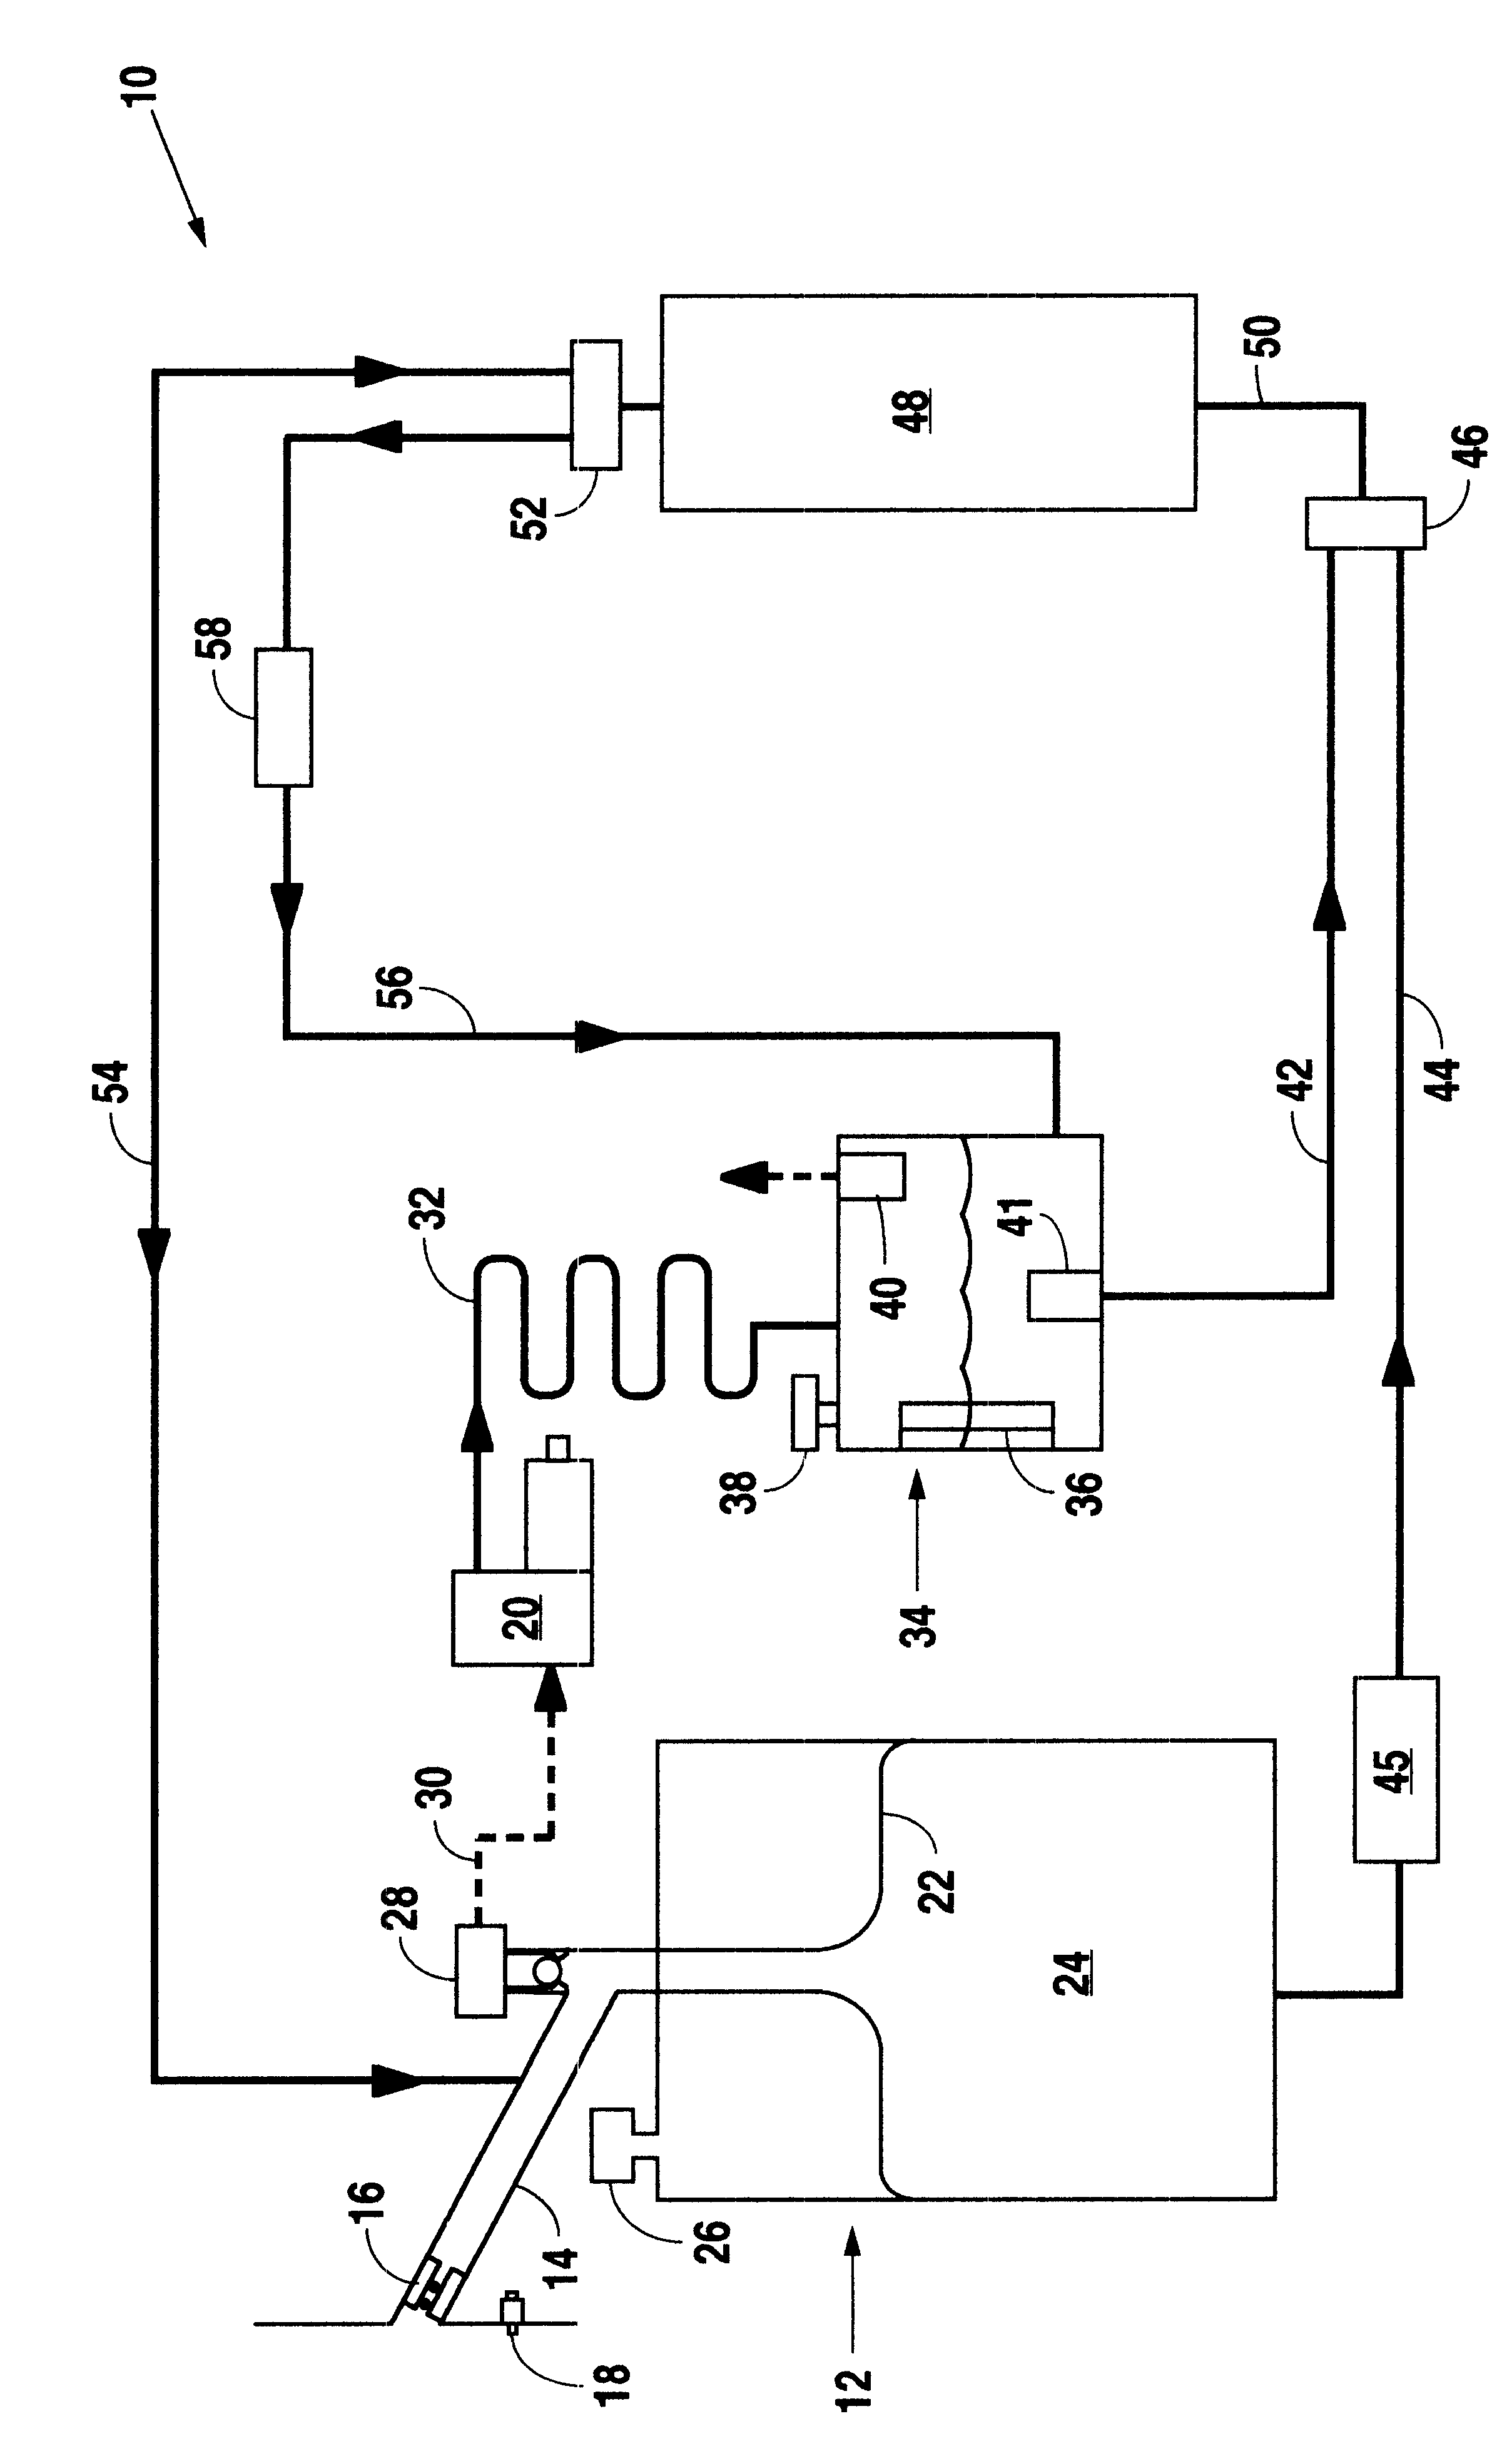 On-board fuel vapor collection, condensation, storage and distribution system for a vehicle